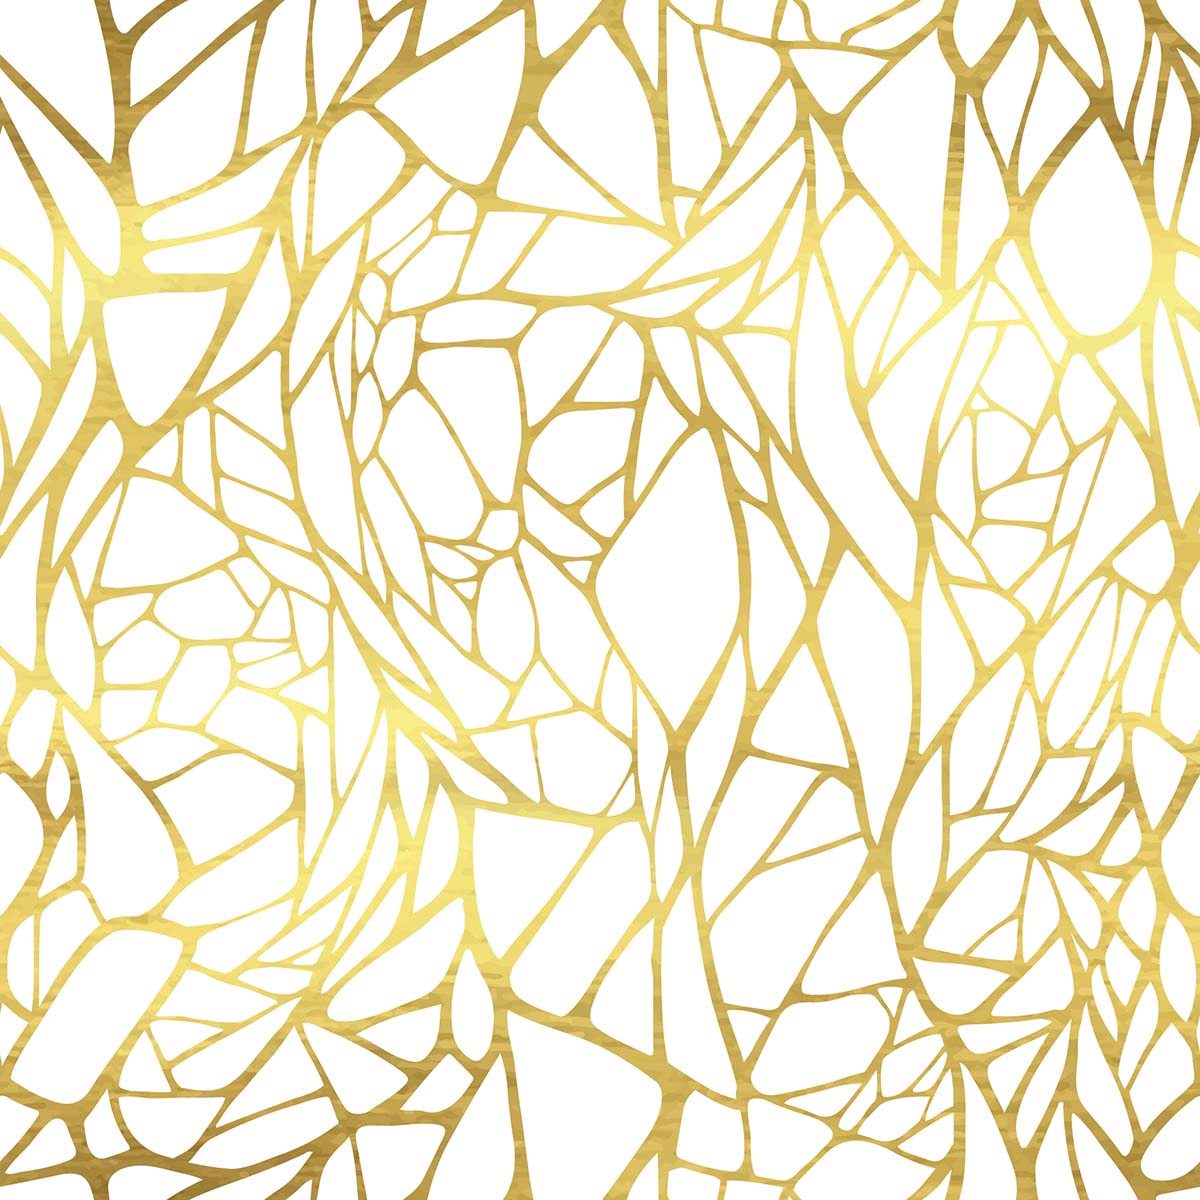 A gold and white pattern